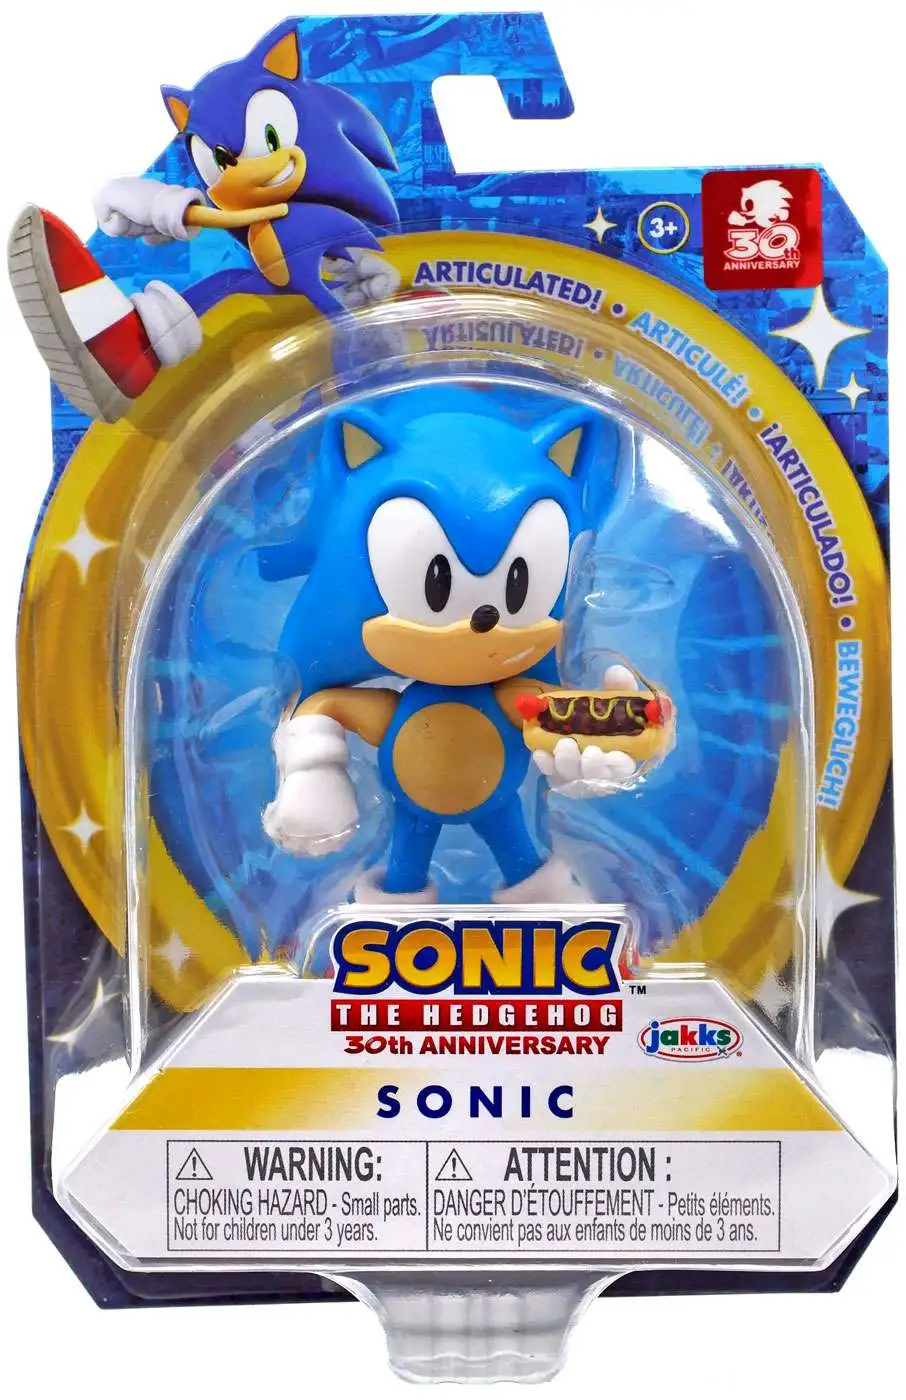  Sonic The Hedgehog Classic Super Sonic 2.5 Mini Action Figure  : Toys & Games